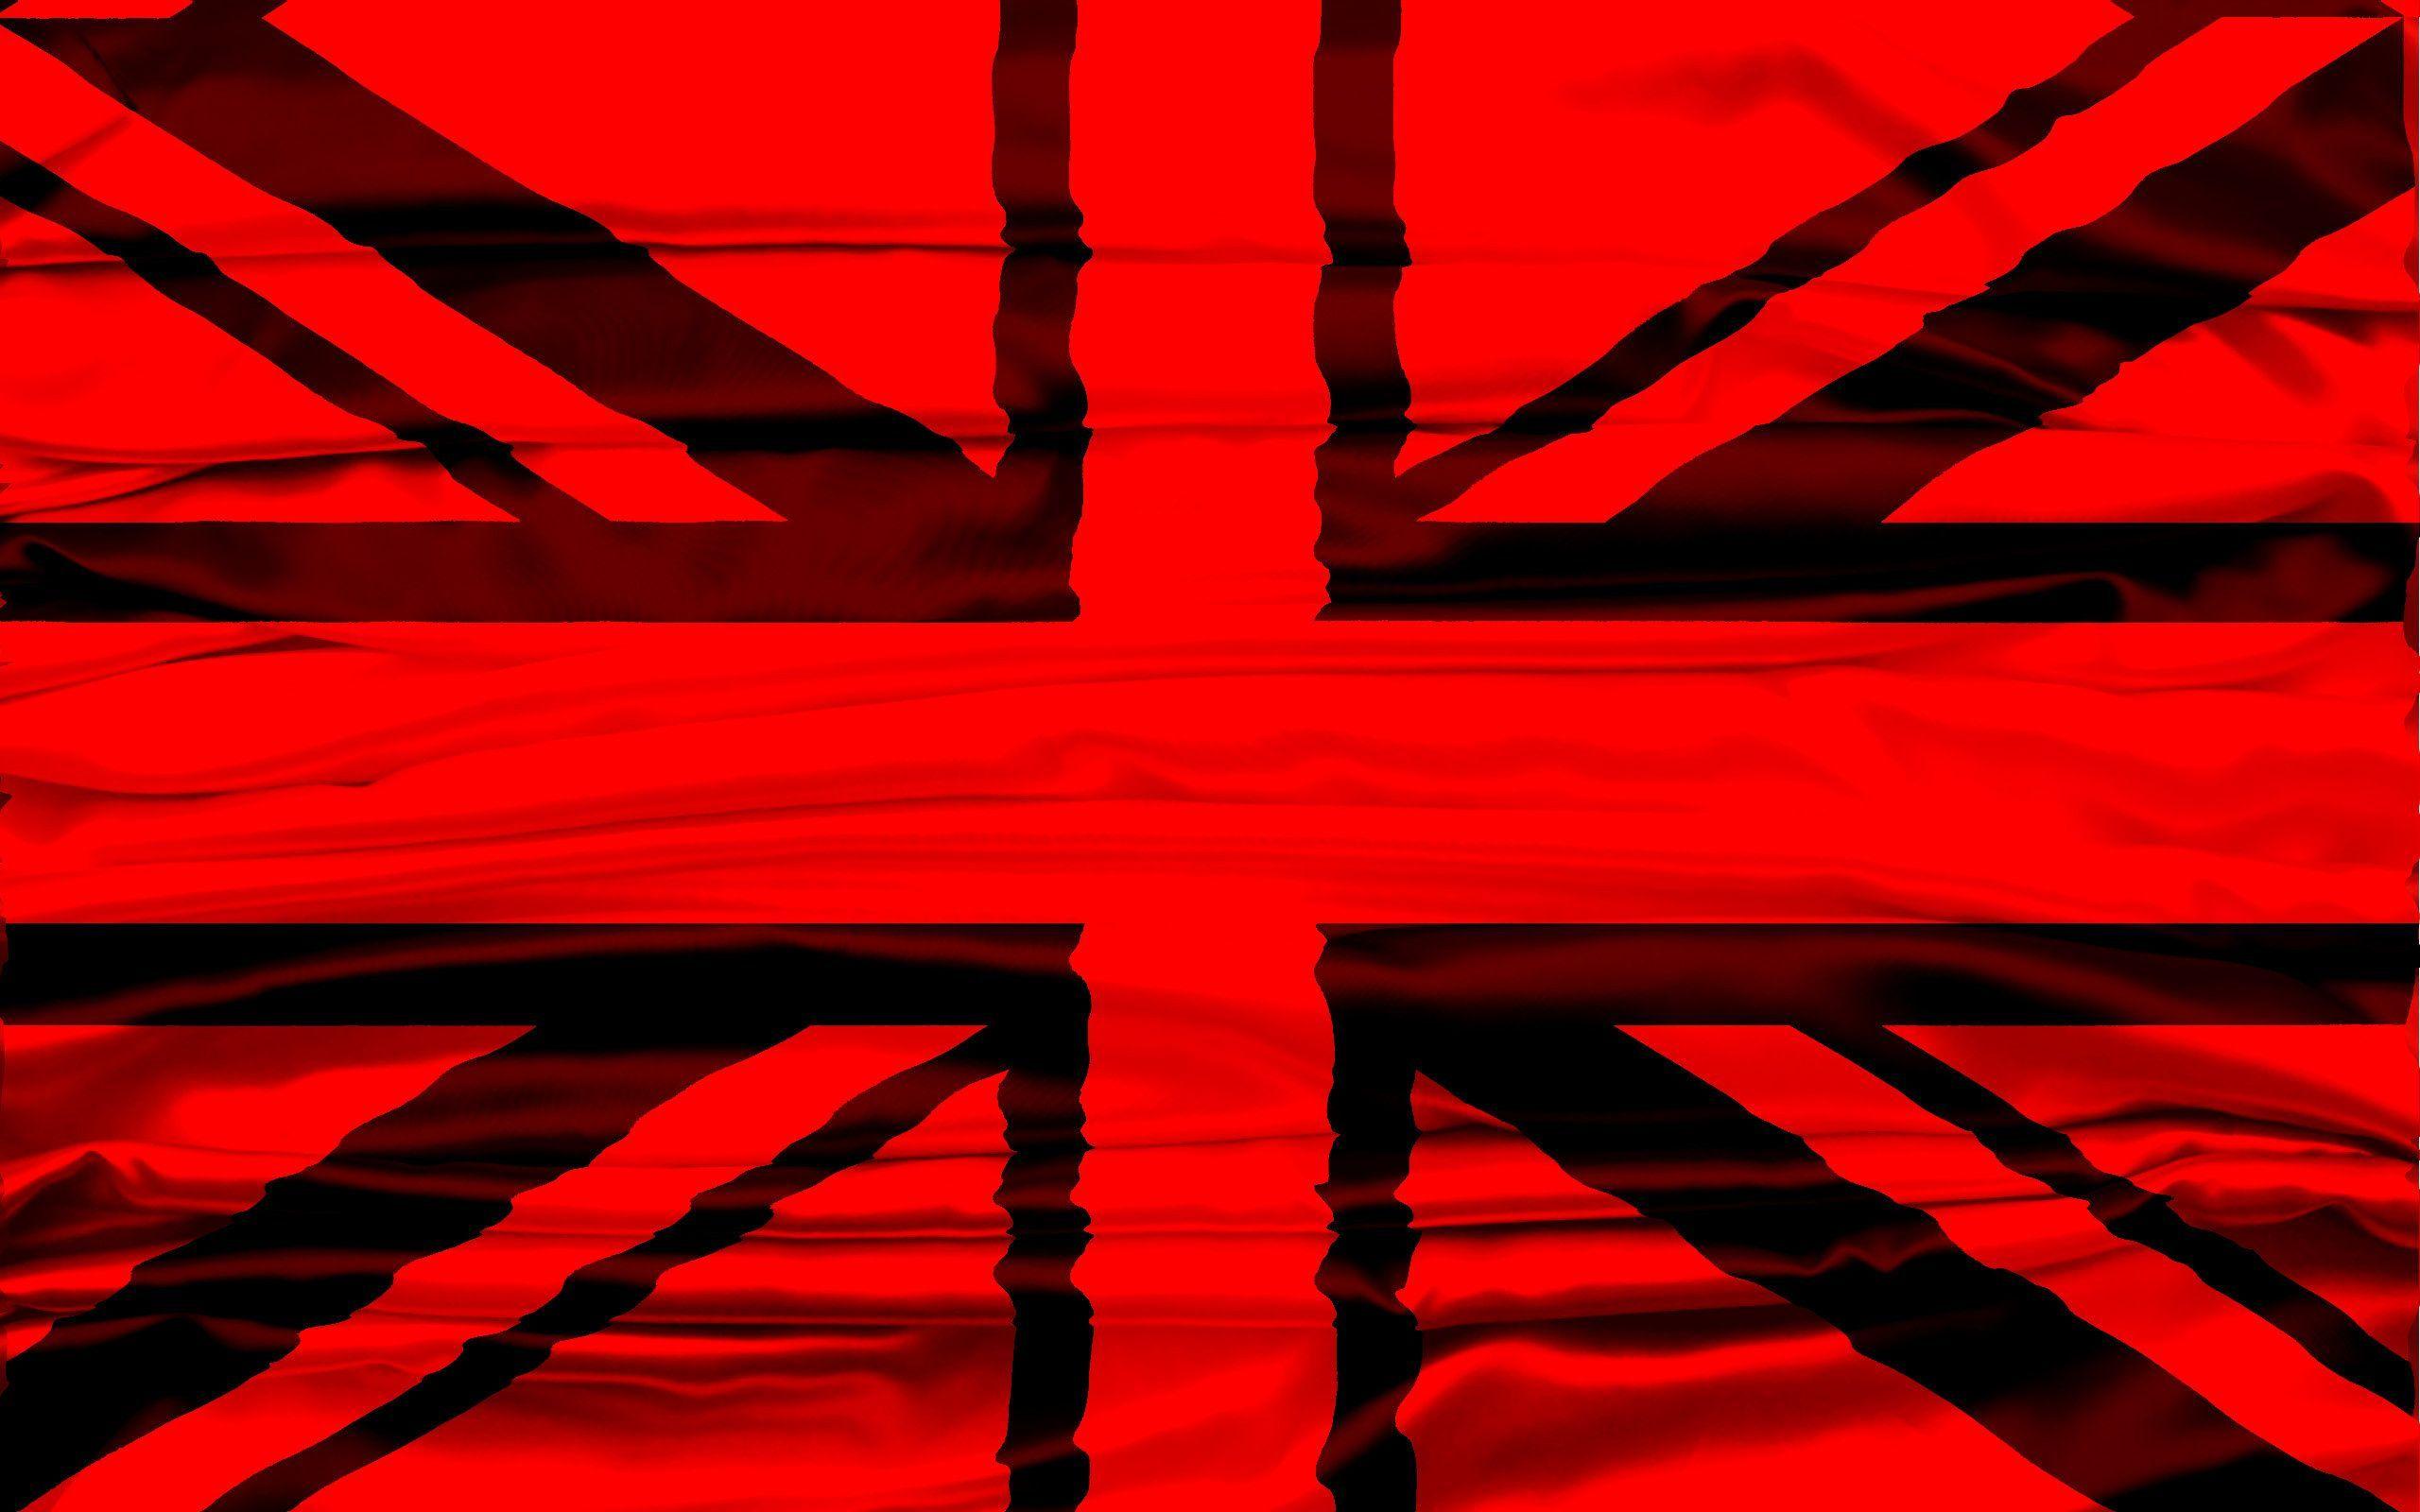 Wallpaper Union Jack. Red and Black Wallpaper